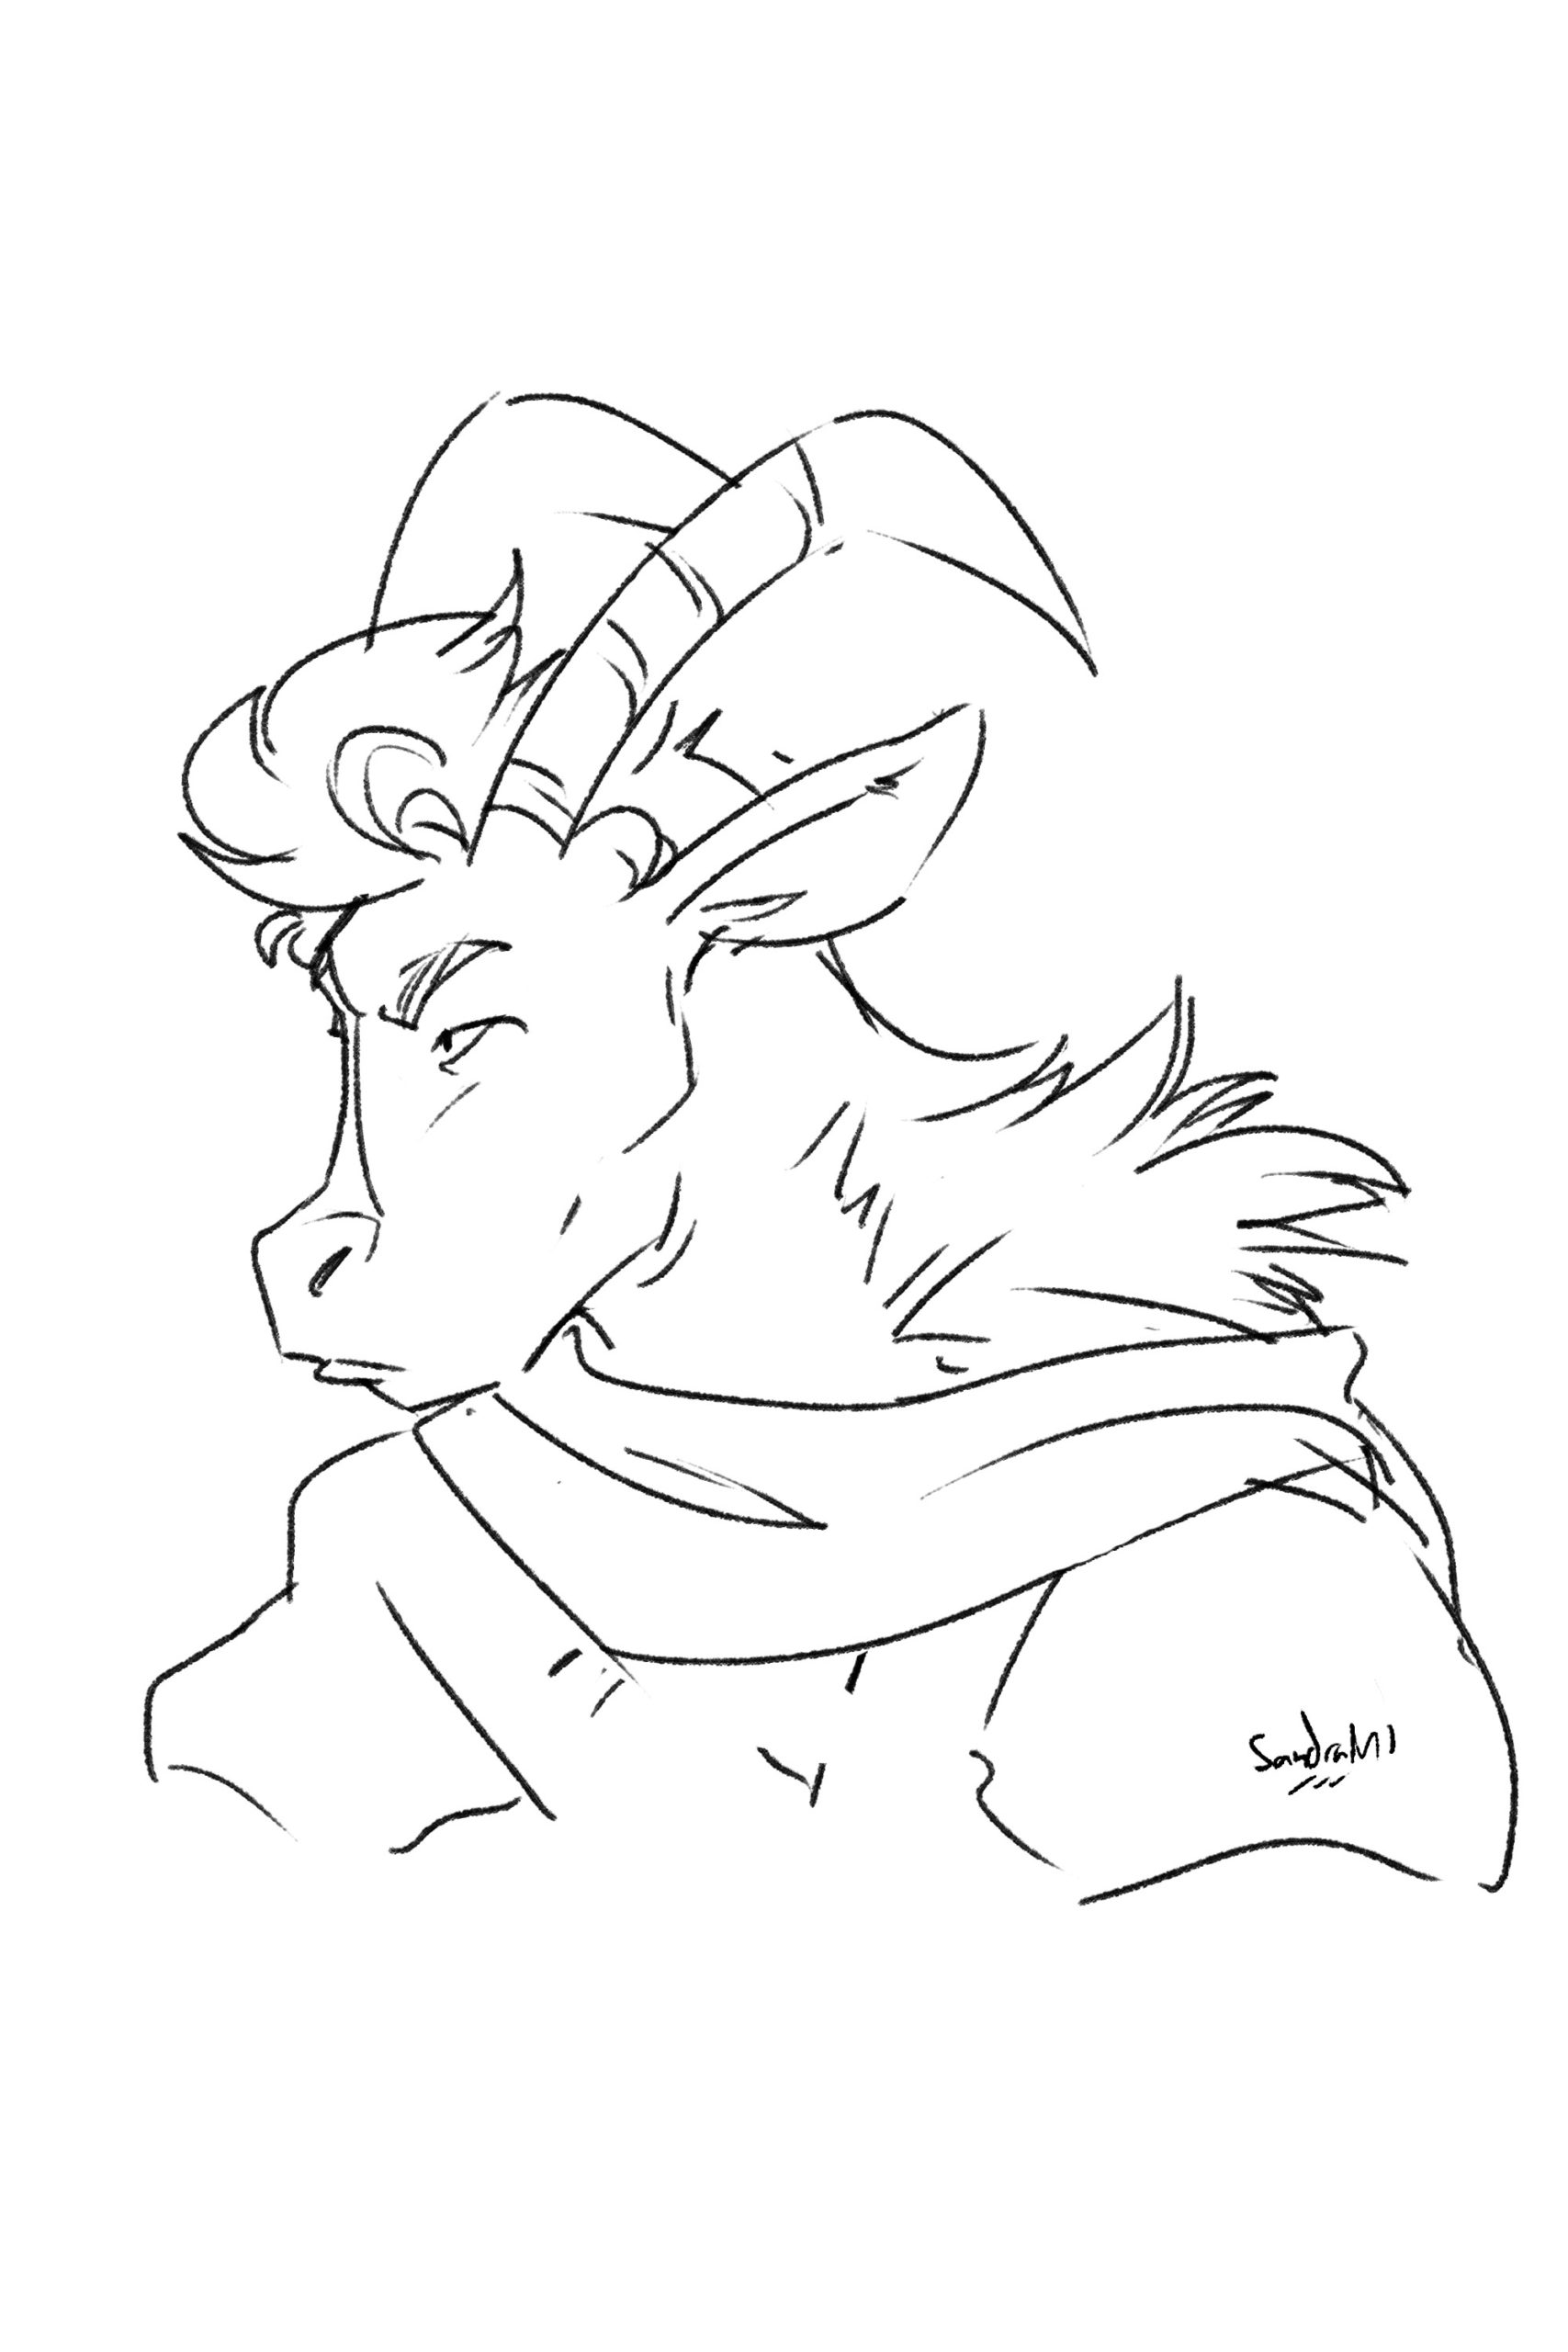 A rough-looking man with curved back horns